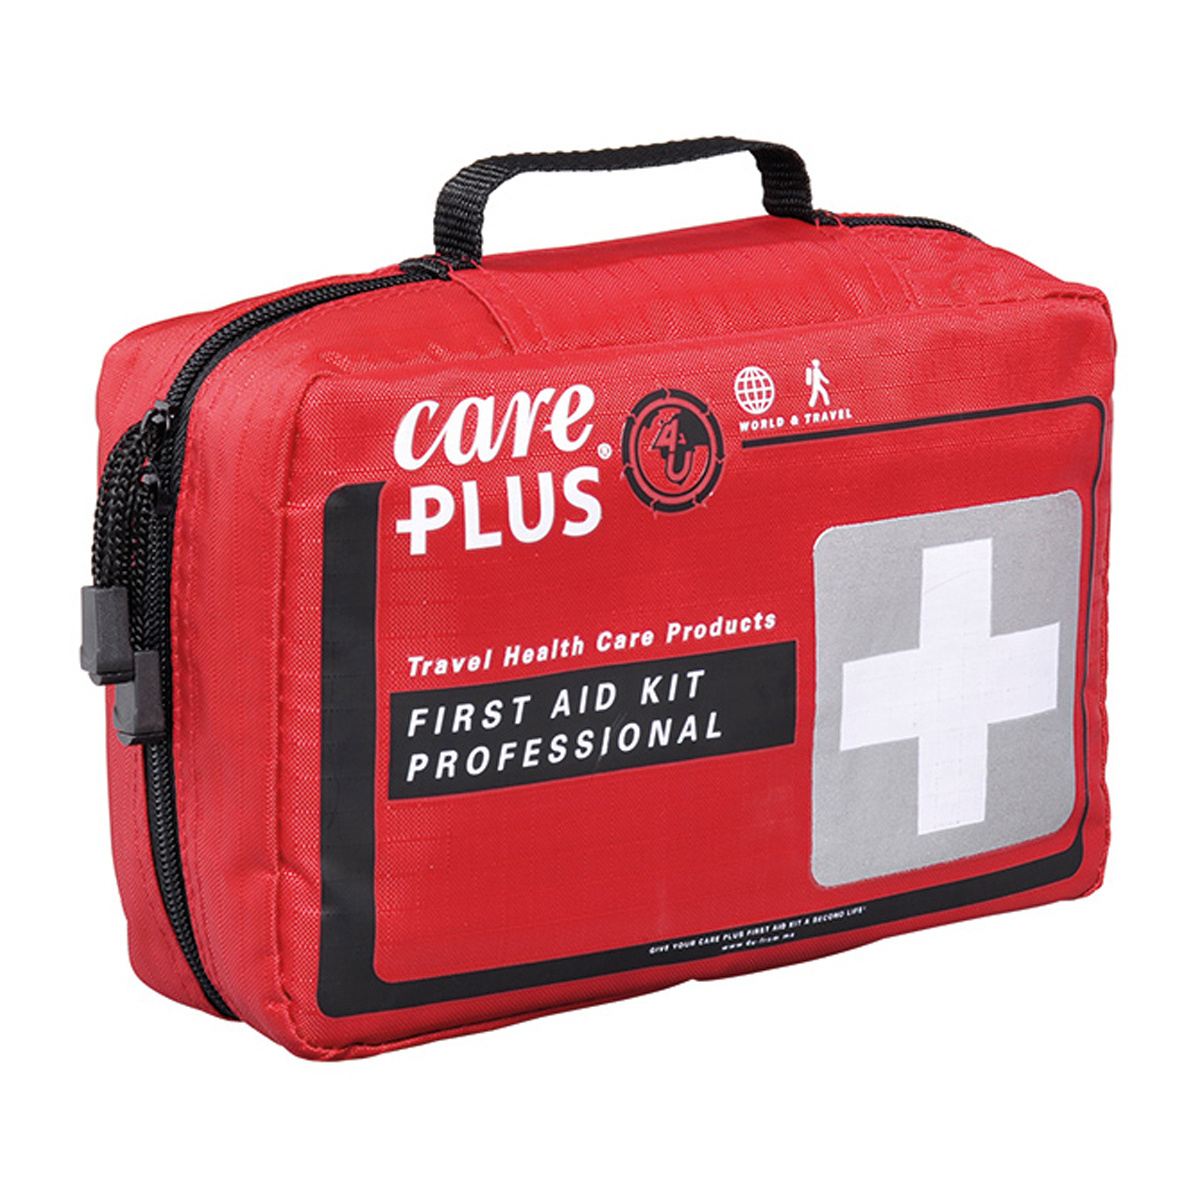 Image of Care Plus First Aid Kit Professional